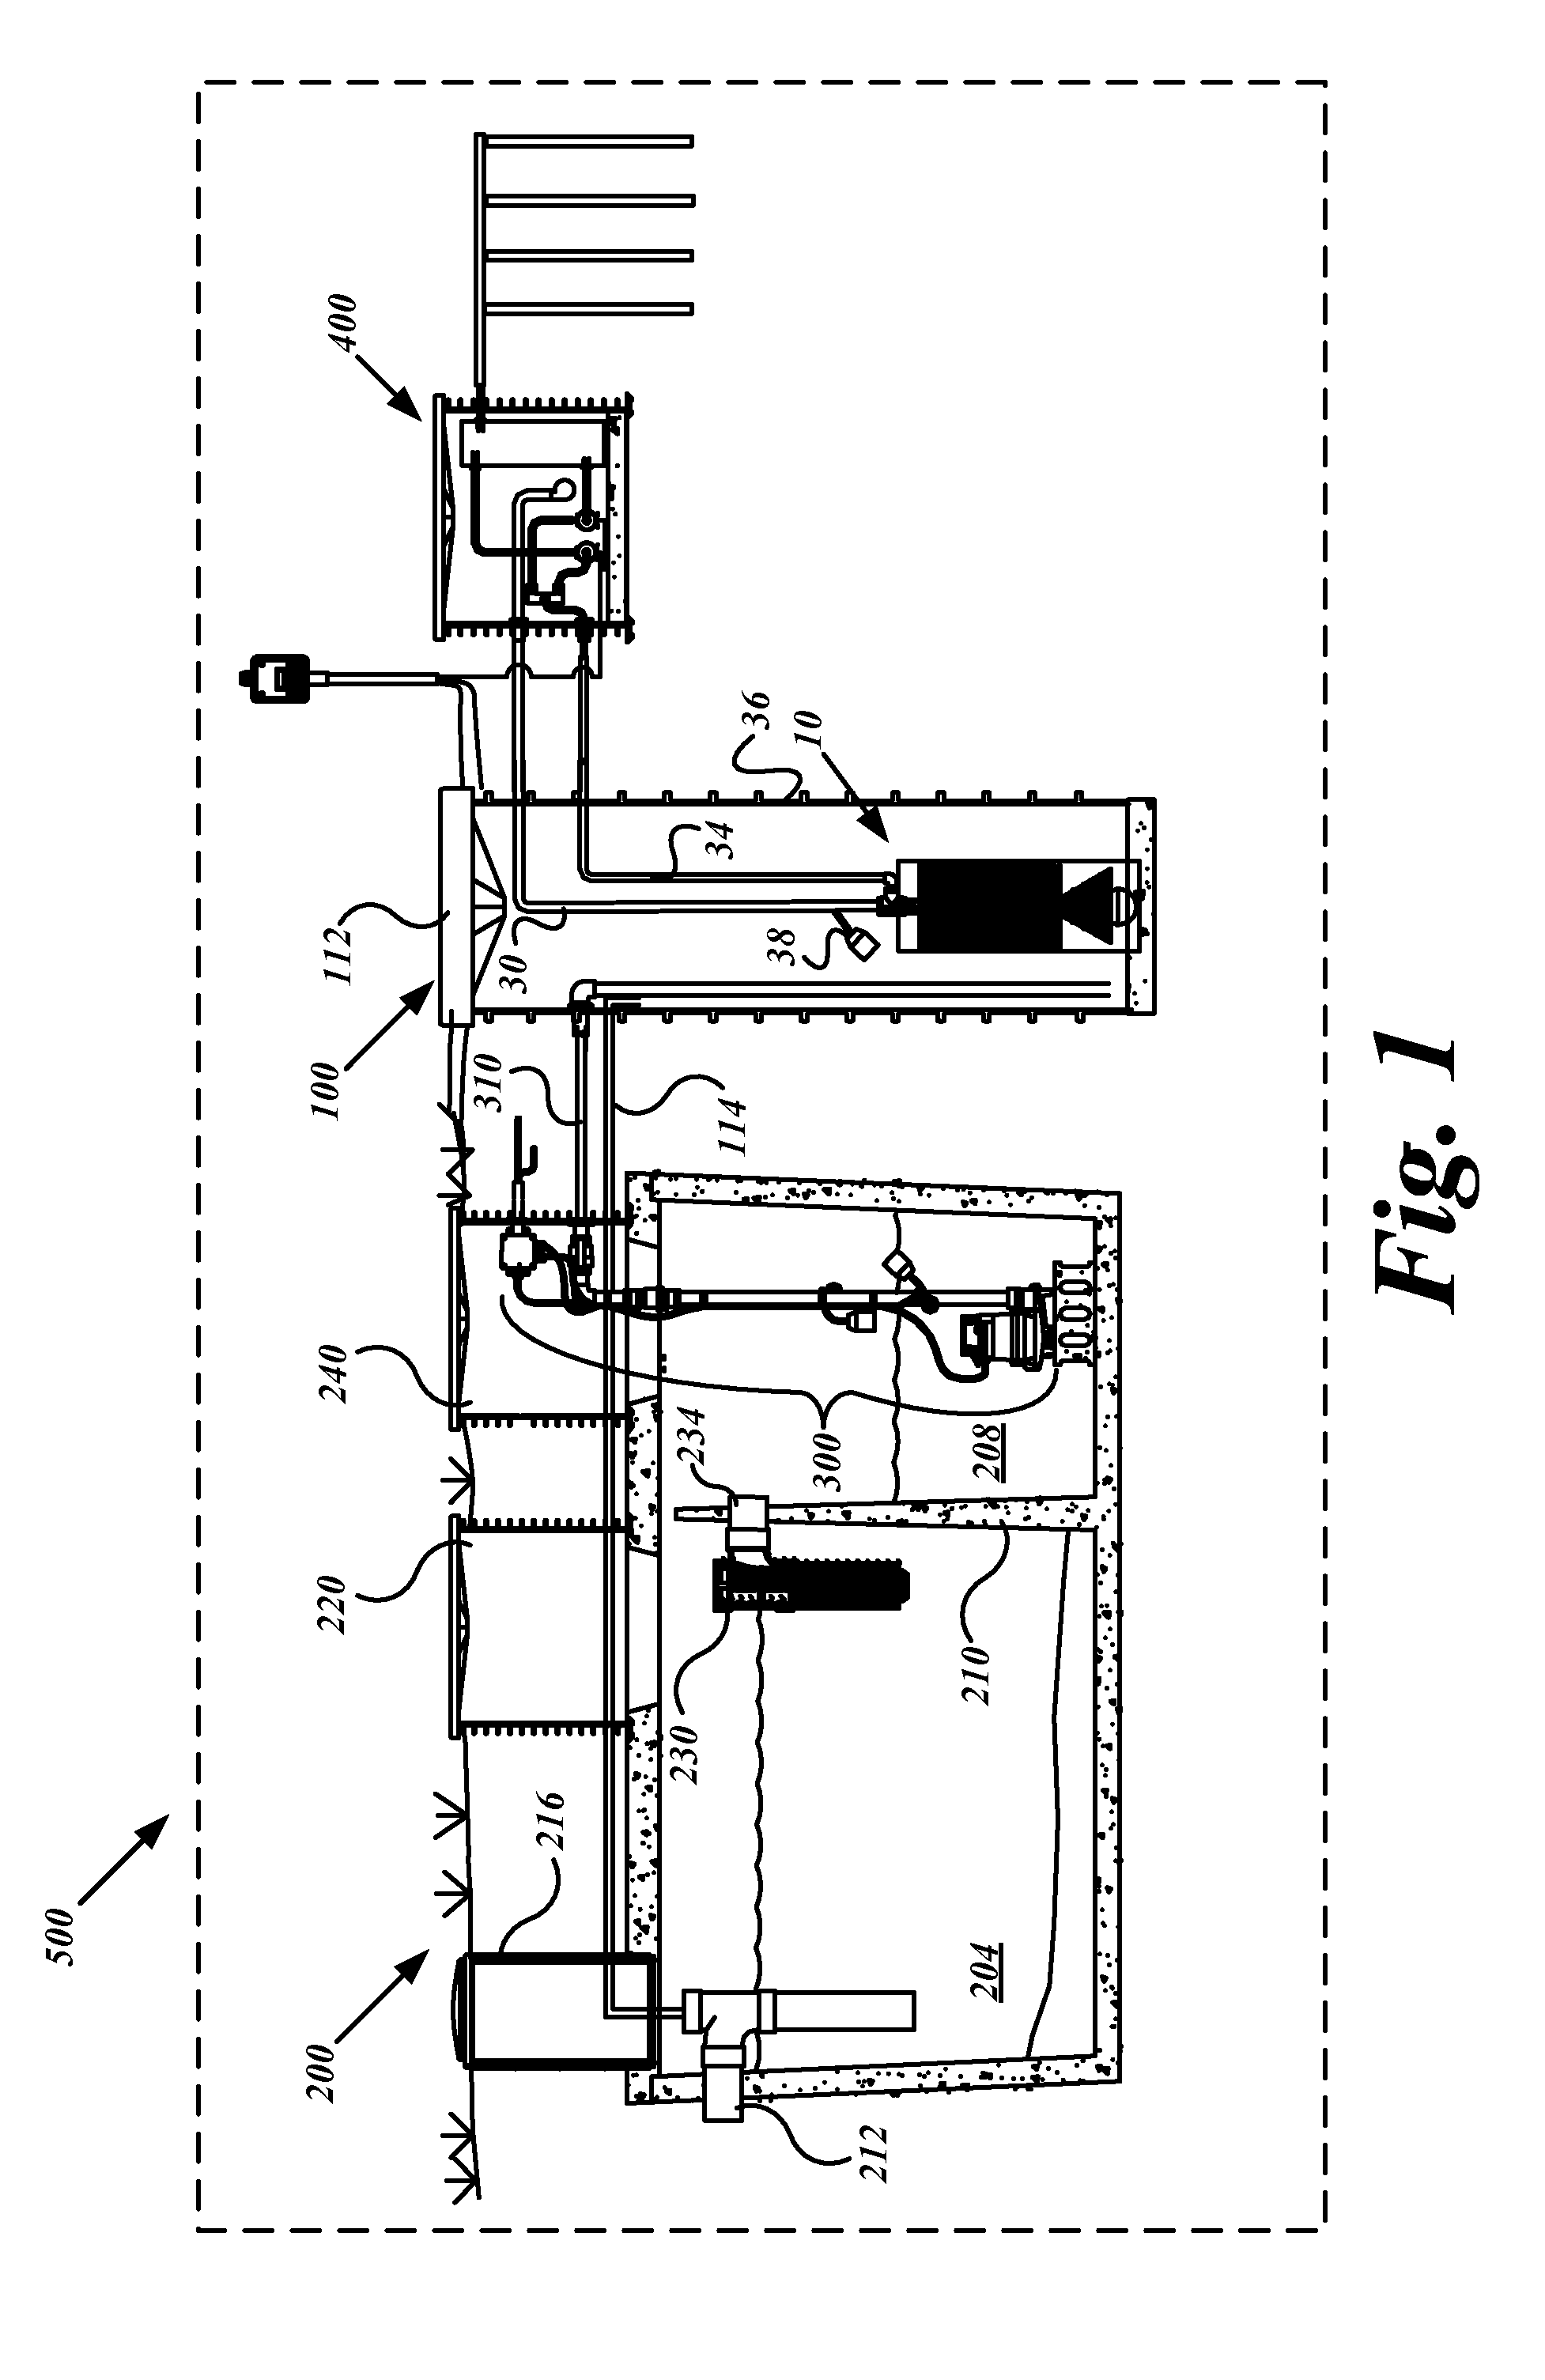 System, device and method for on-site wastewater processing